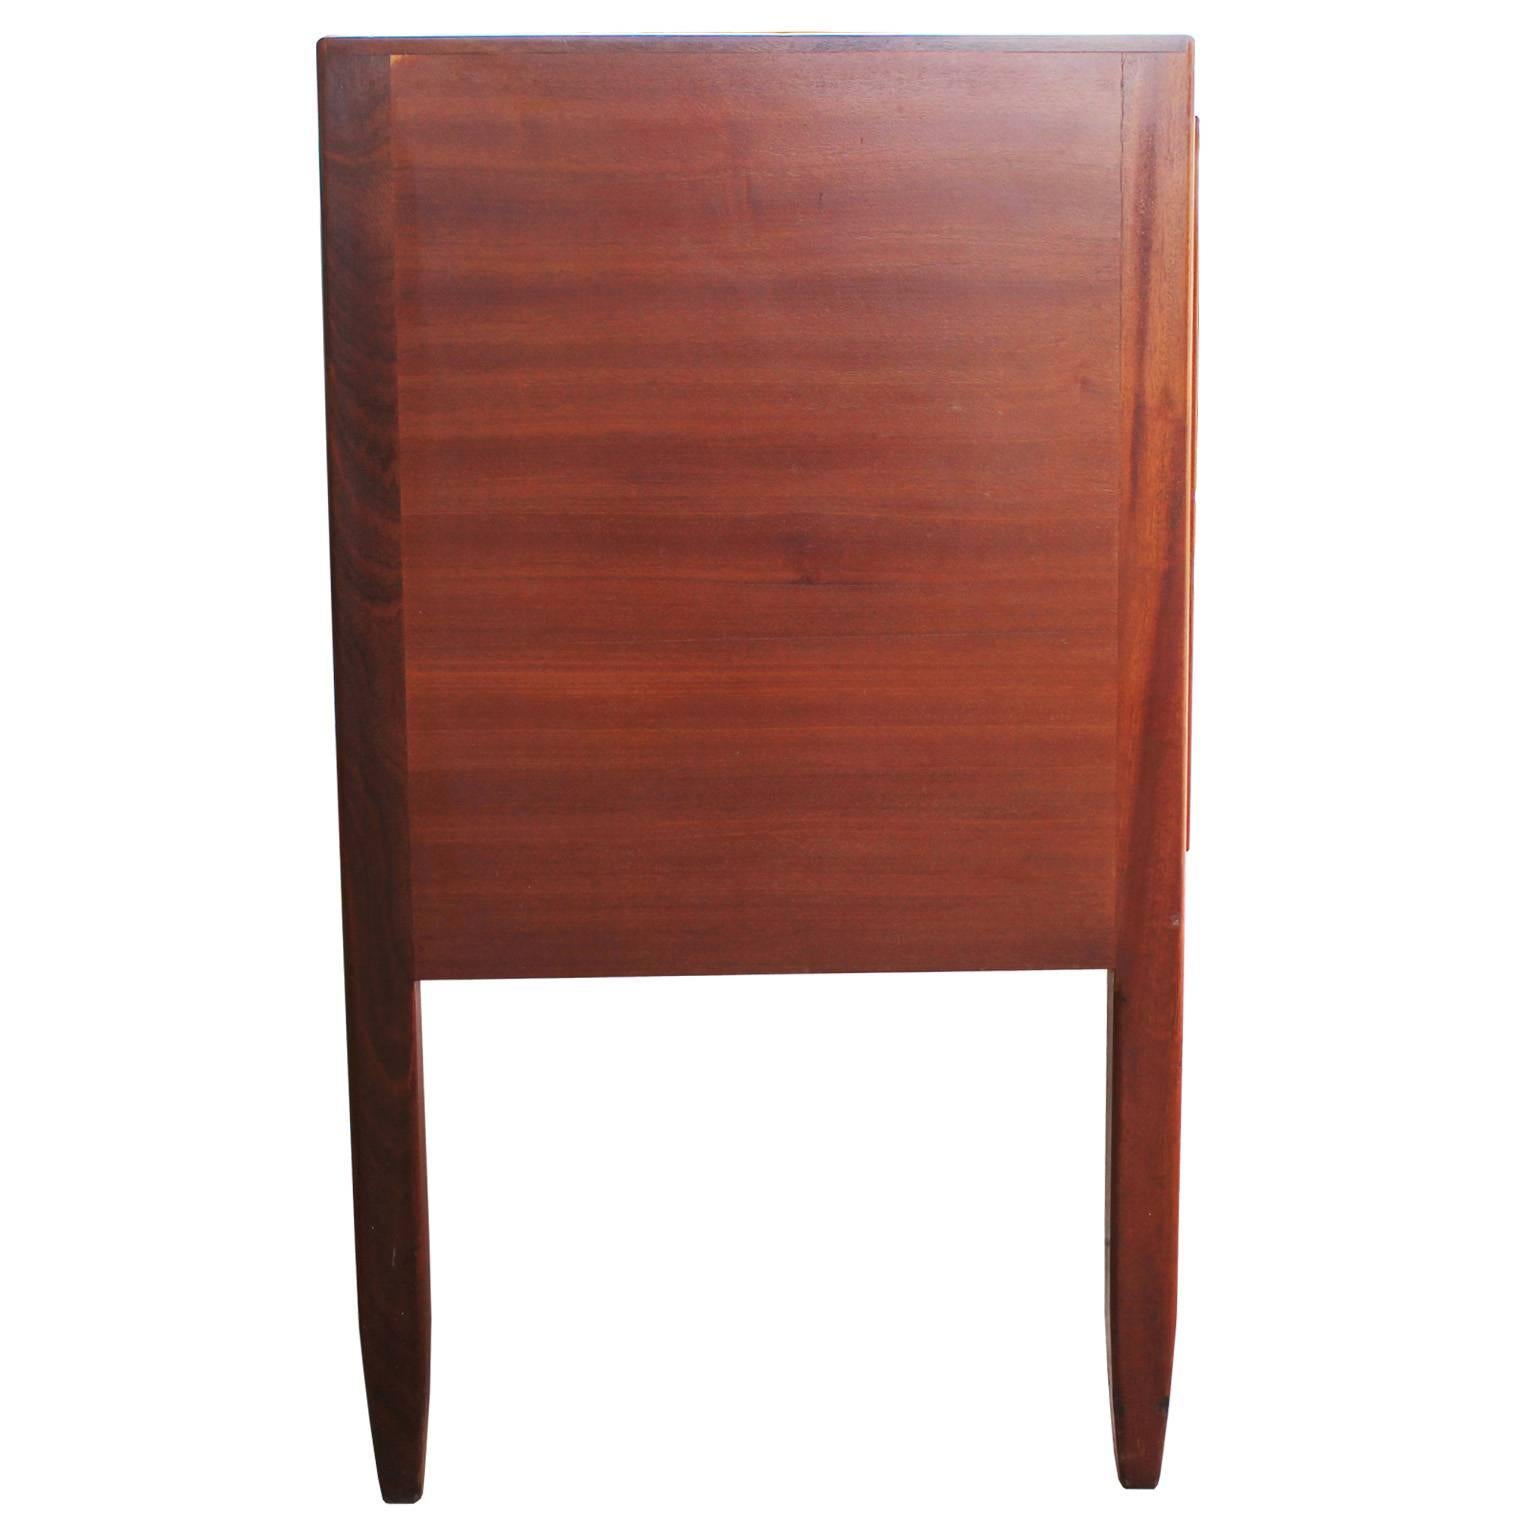 Mid-Century Modern Modern Teak Sideboard or Cabinet with Brass Inlays and Flower Motif